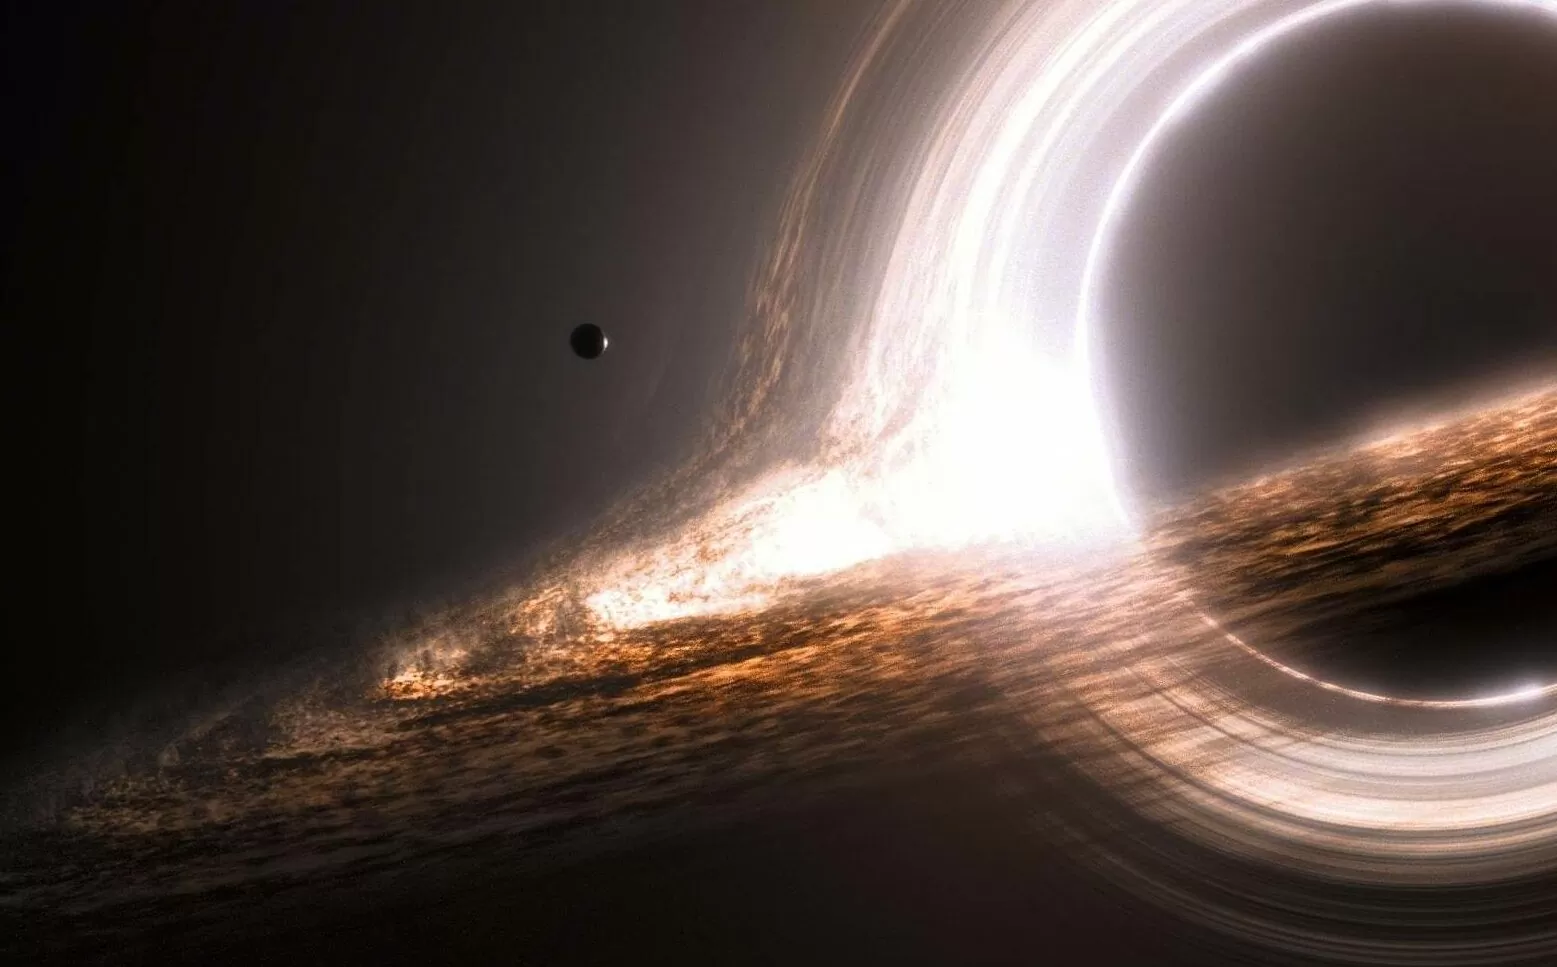 A giant black hole has been discovered near the solar system